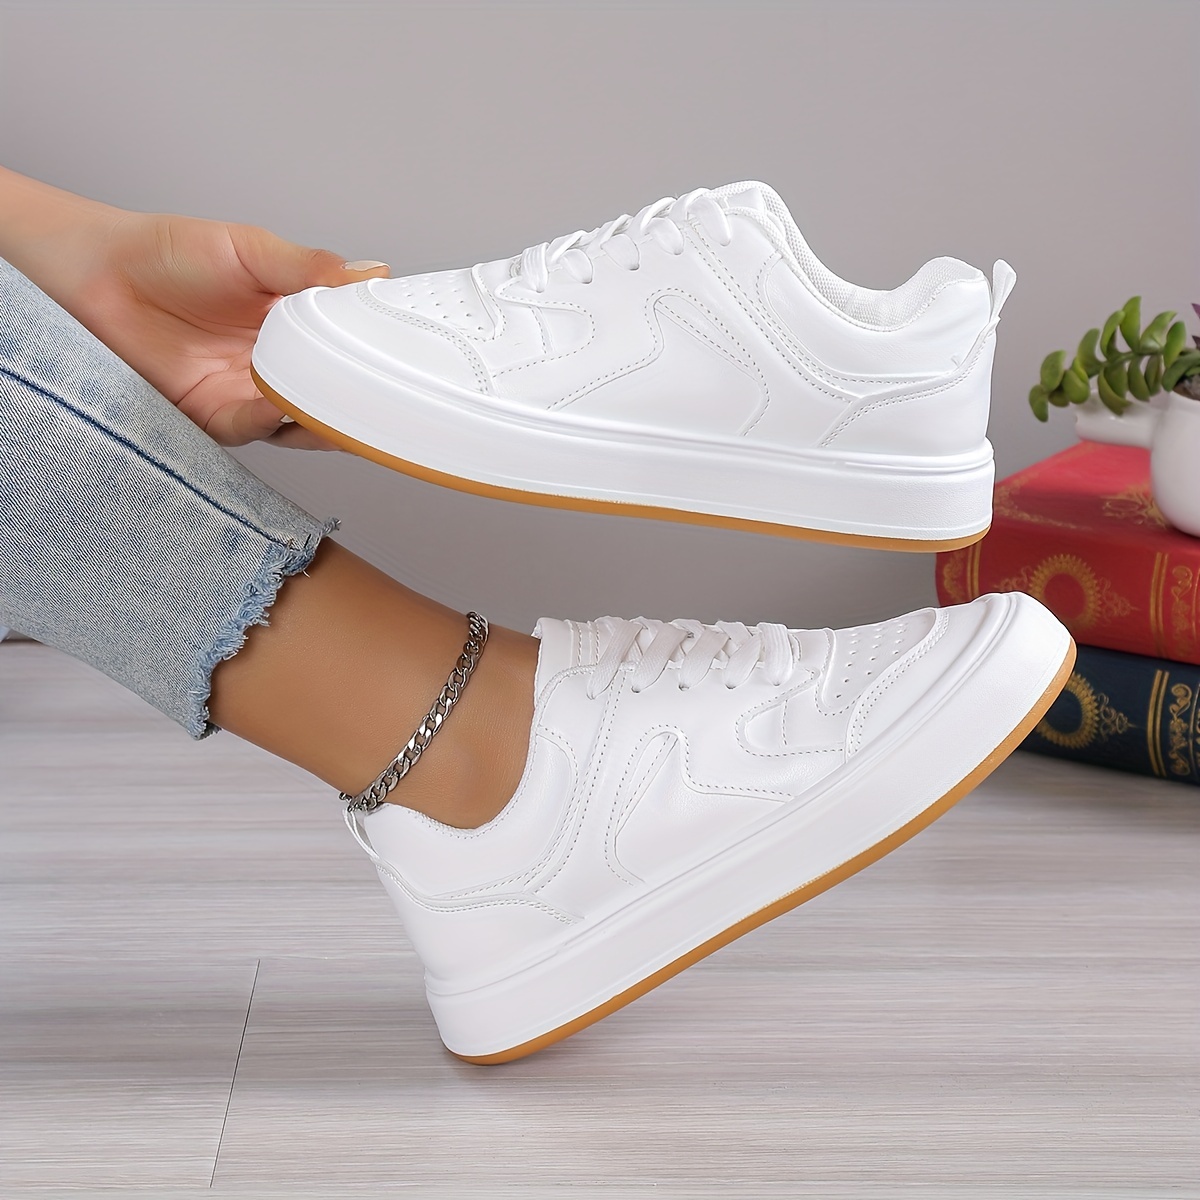 womens colorblock skate shoes versatile low top lace up sports shoes casual flat sneakers details 5